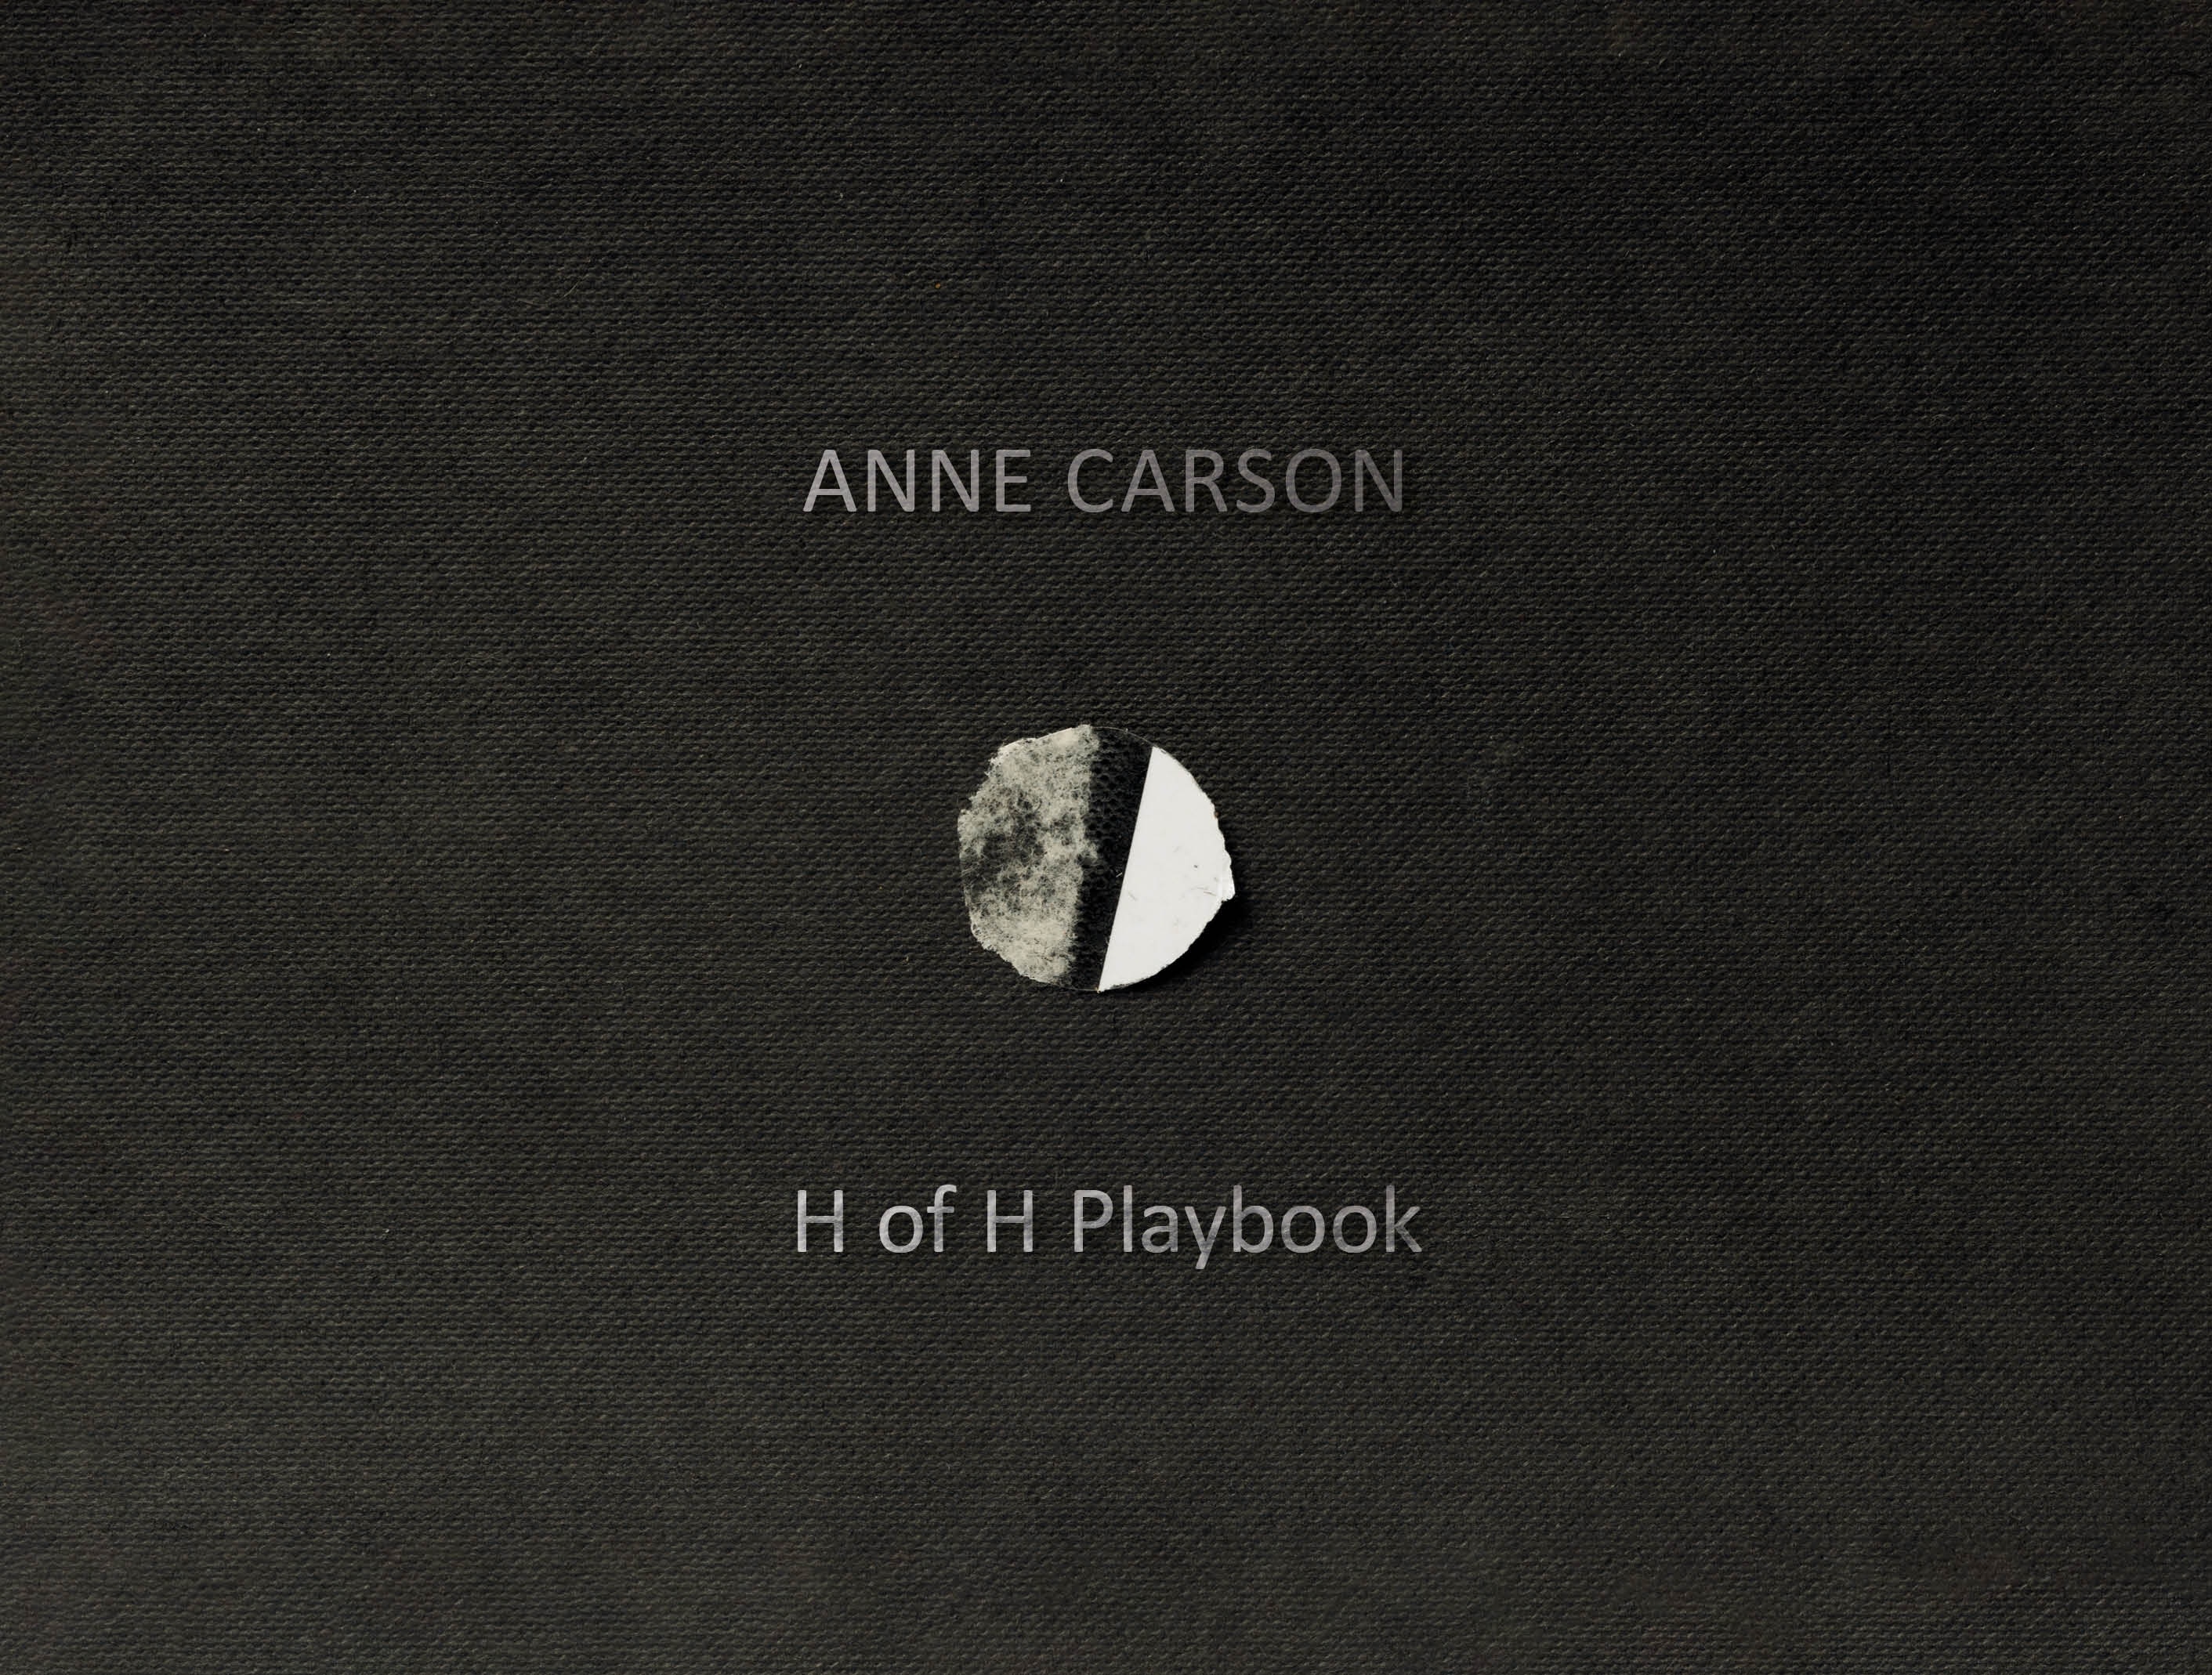 Book “H of H Playbook” by Anne Carson — November 4, 2021